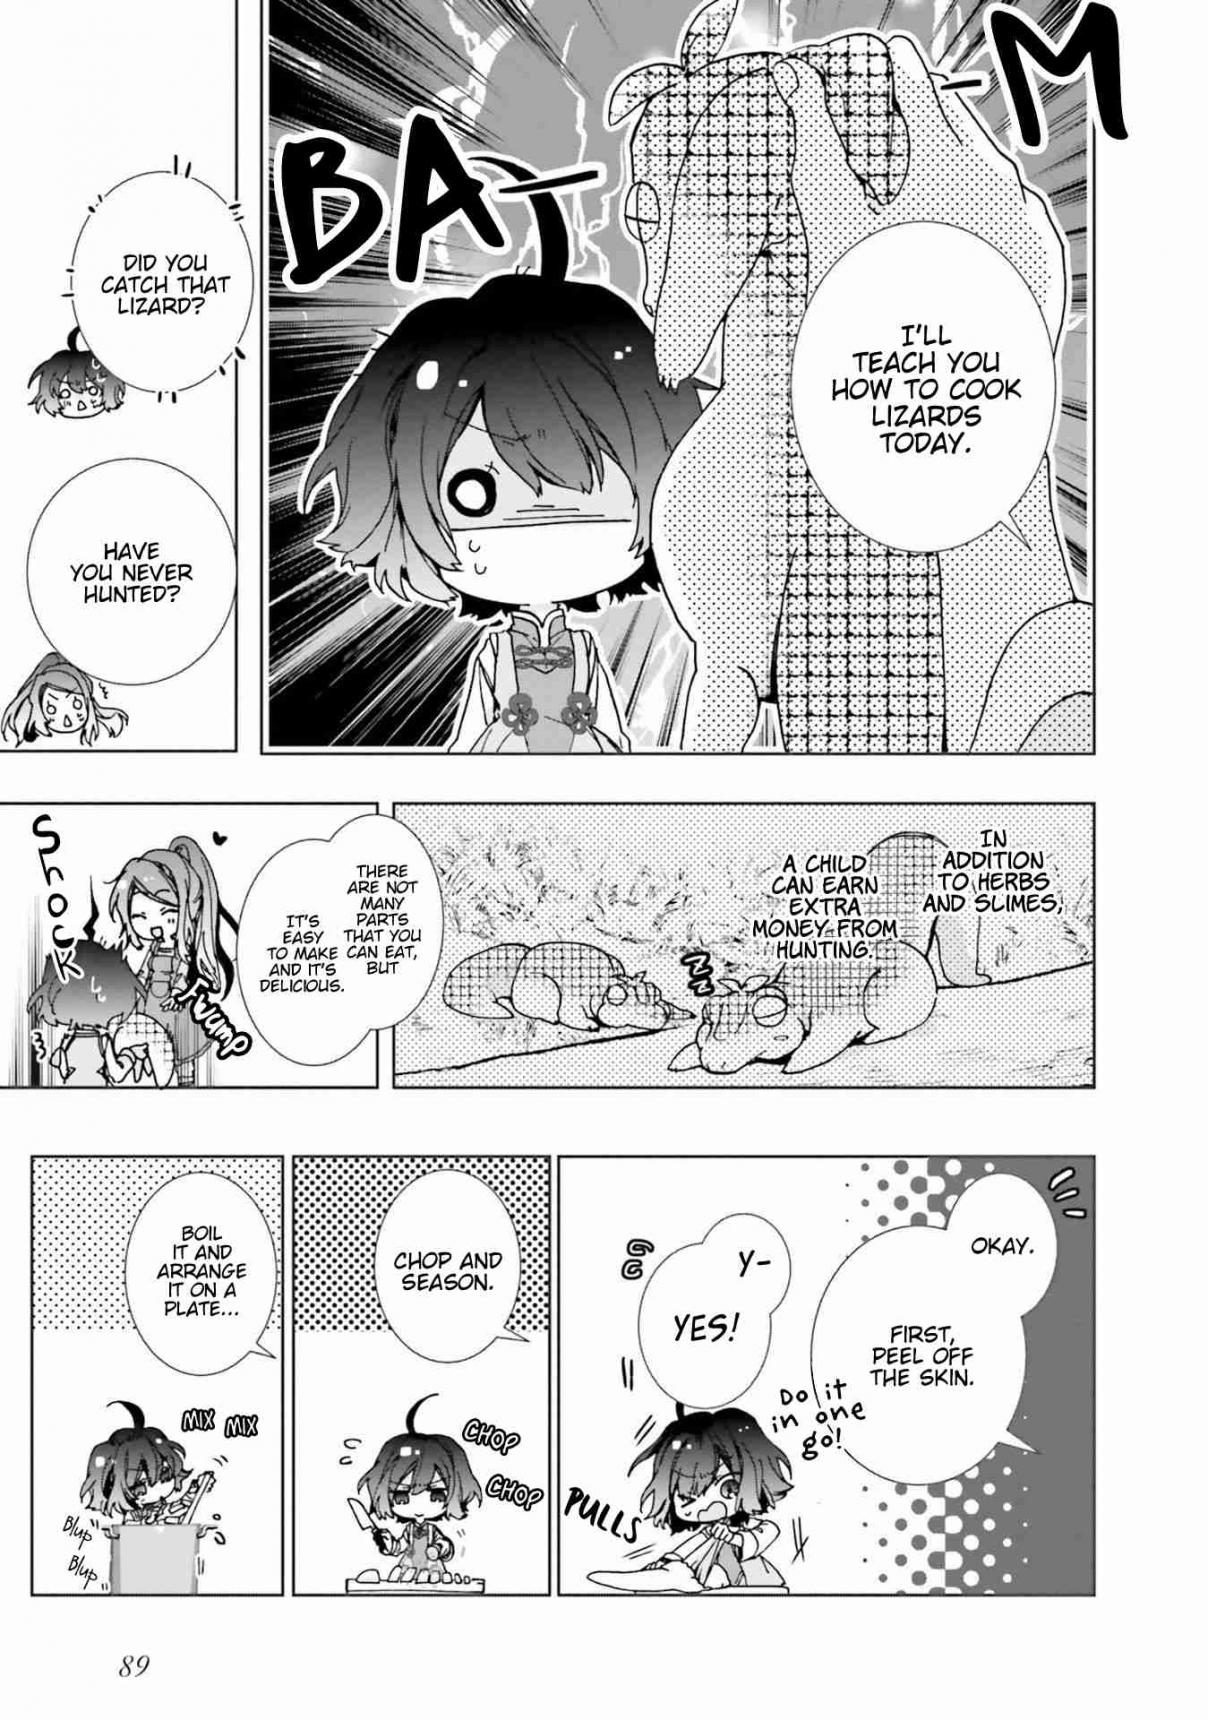 I Will Leisurely Become A Healer in Another World Vol. 1 Ch. 3